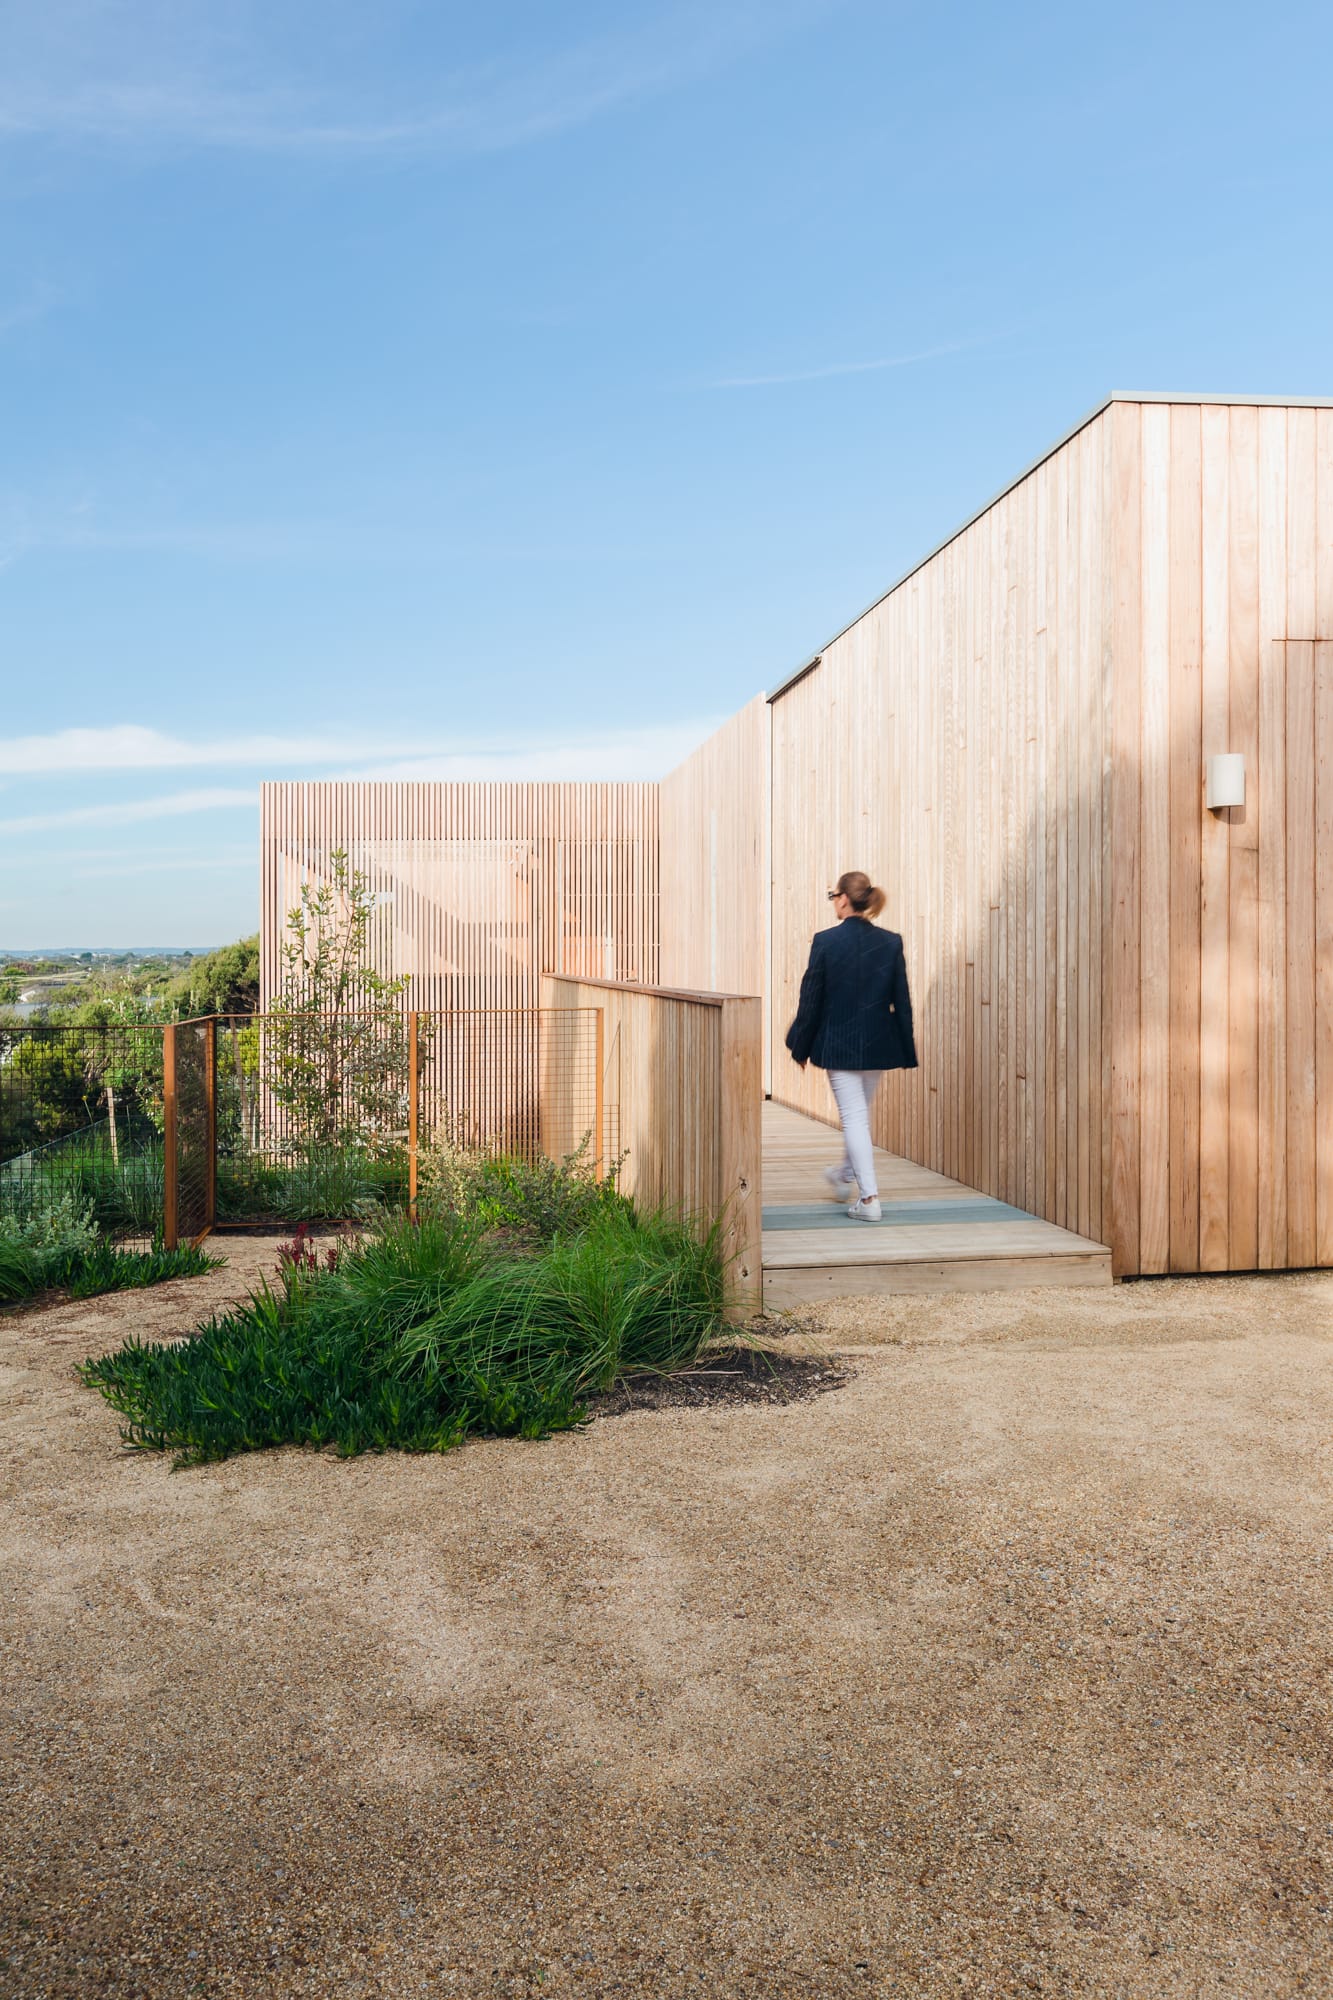 Ritchie Blairgowrie by Julie Crowe Landscape Design. Photography by Erik Holt Photography.  Women walks across timber deck running alongside timber-clad home. Crushed limestone flooring below deck. Native plant life. 